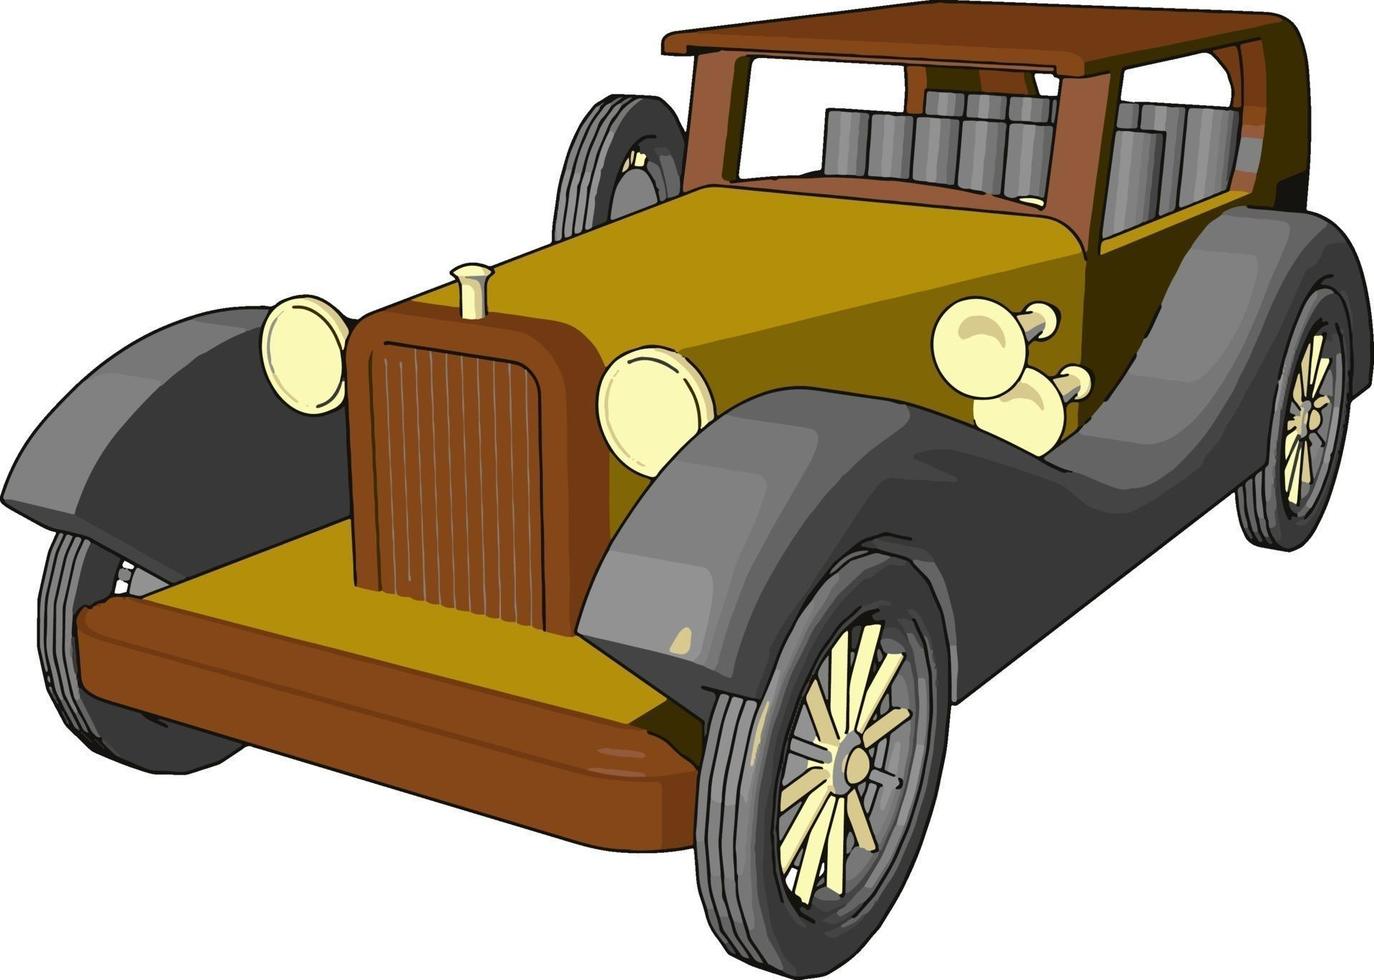 Old retro car toy, illustration, vector on white background.